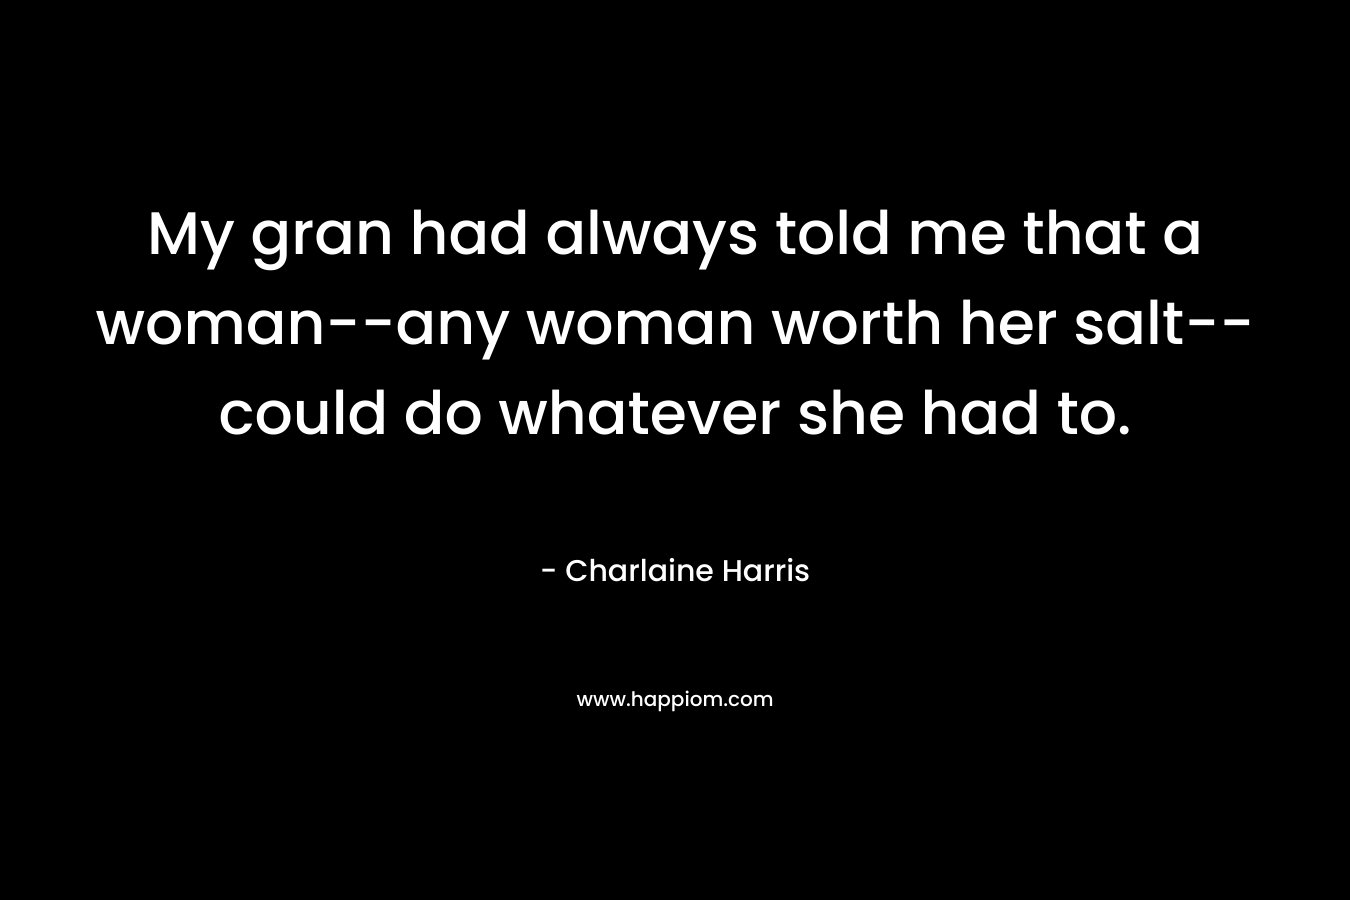 My gran had always told me that a woman--any woman worth her salt--could do whatever she had to.